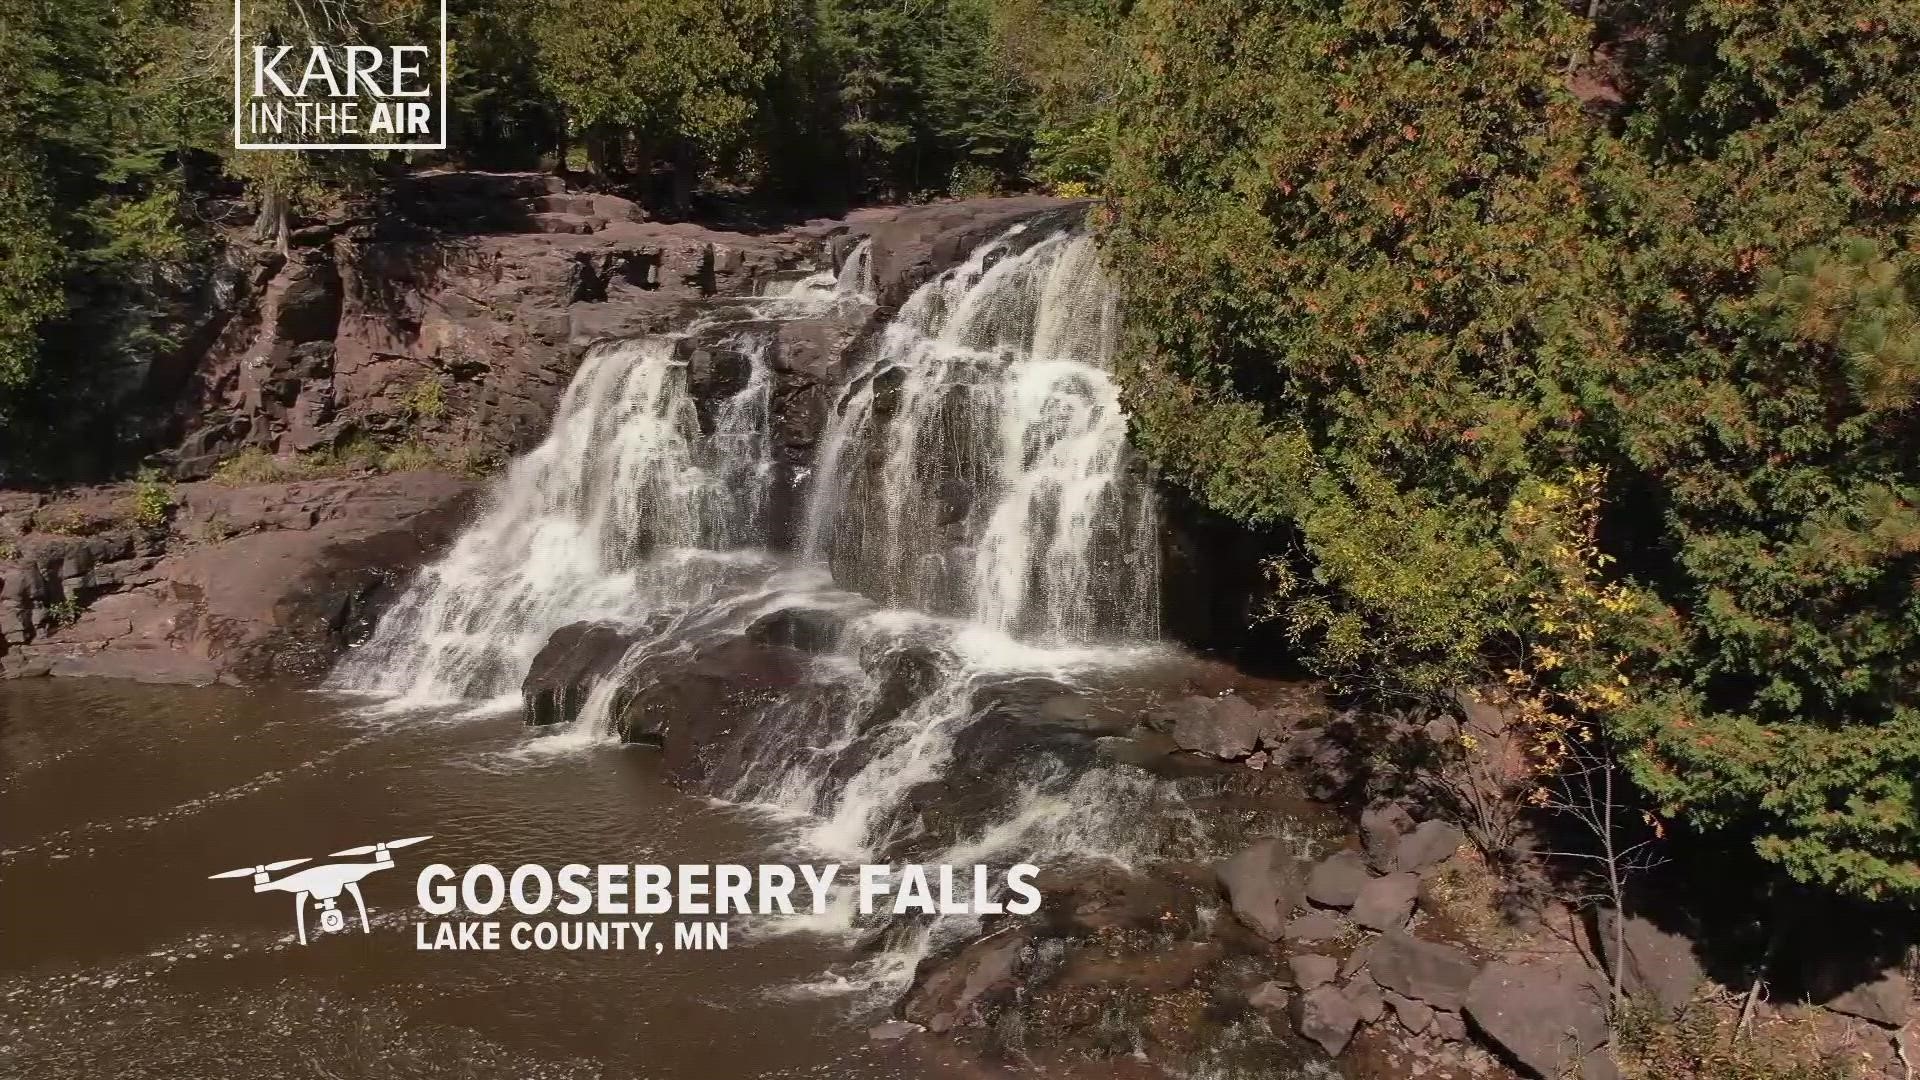 Gooseberry Falls is a series of three waterfalls along the Gooseberry River, all together dropping some 90 feet to reach the shores of Lake Superior.